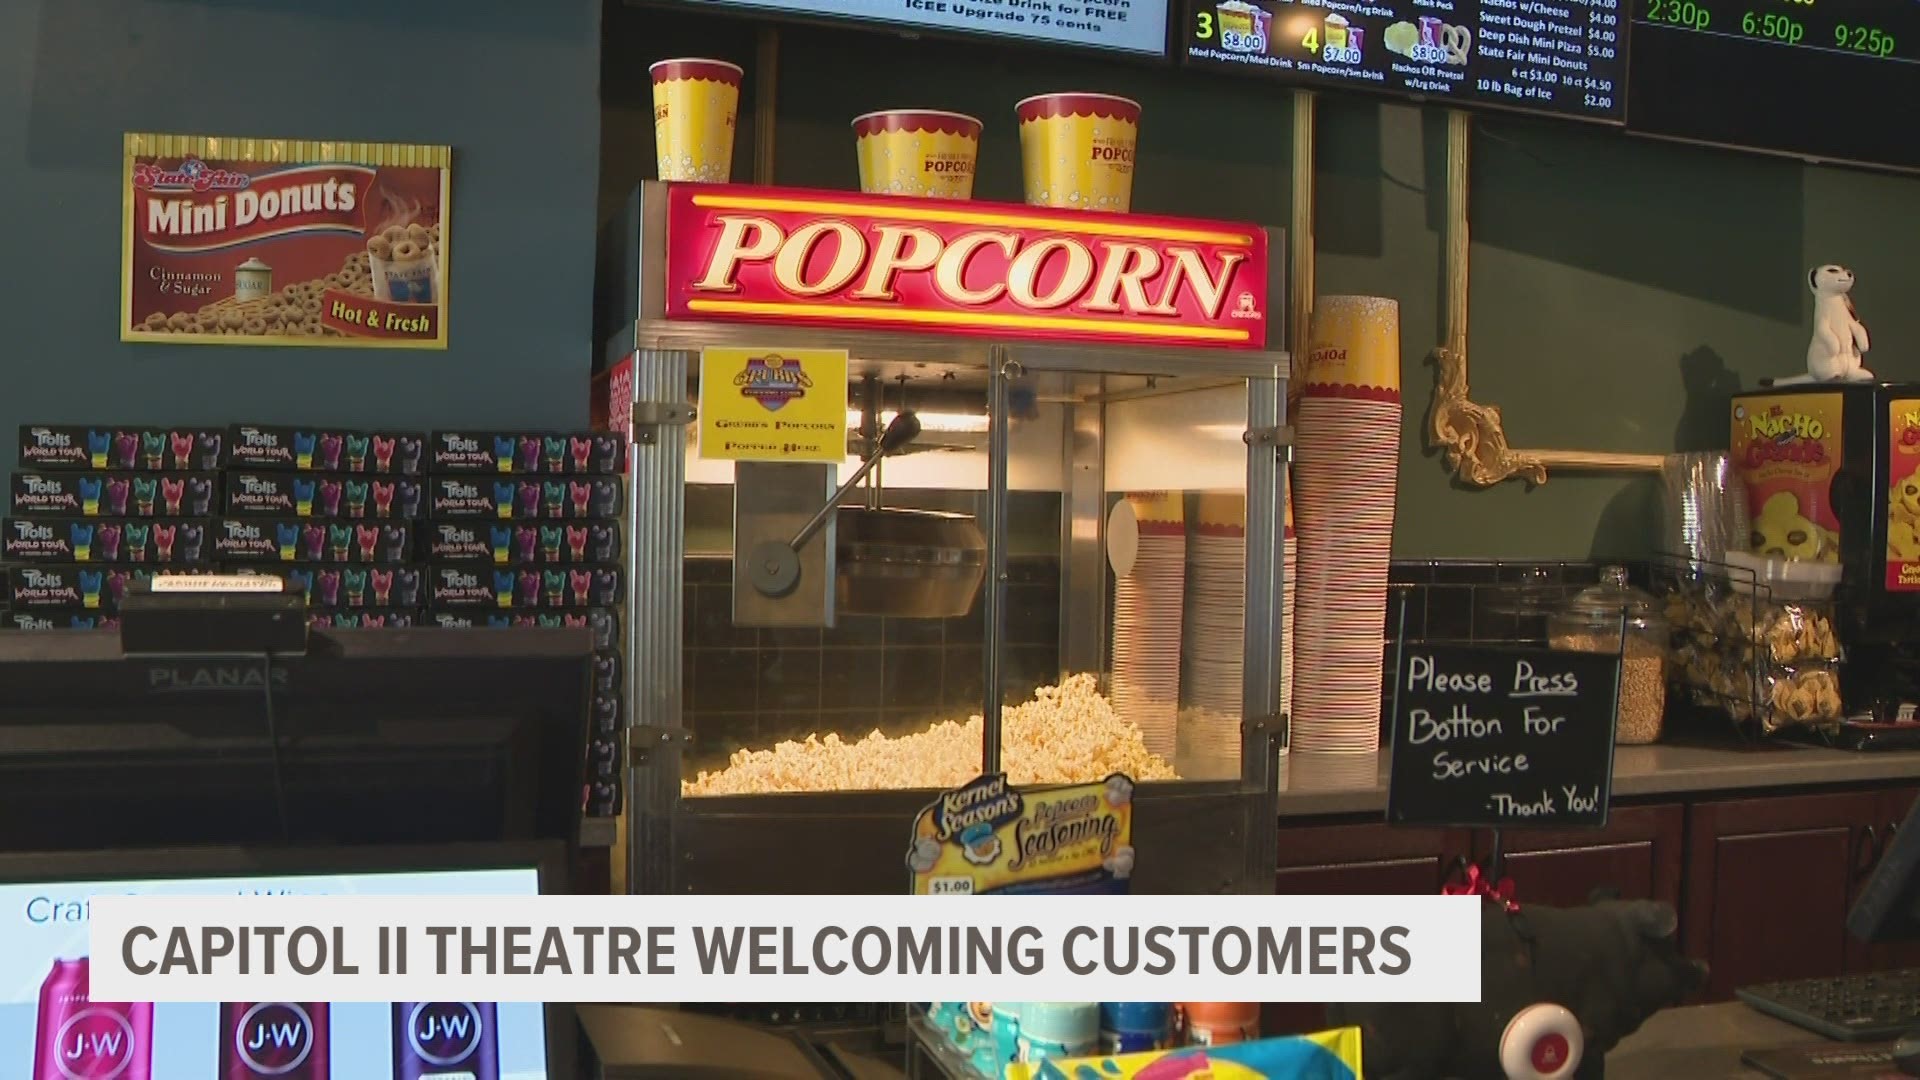 After a year of shutdowns, more businesses are opening back up to customers. Capitol II Theatre is doing everything it can to keep those customers safe.